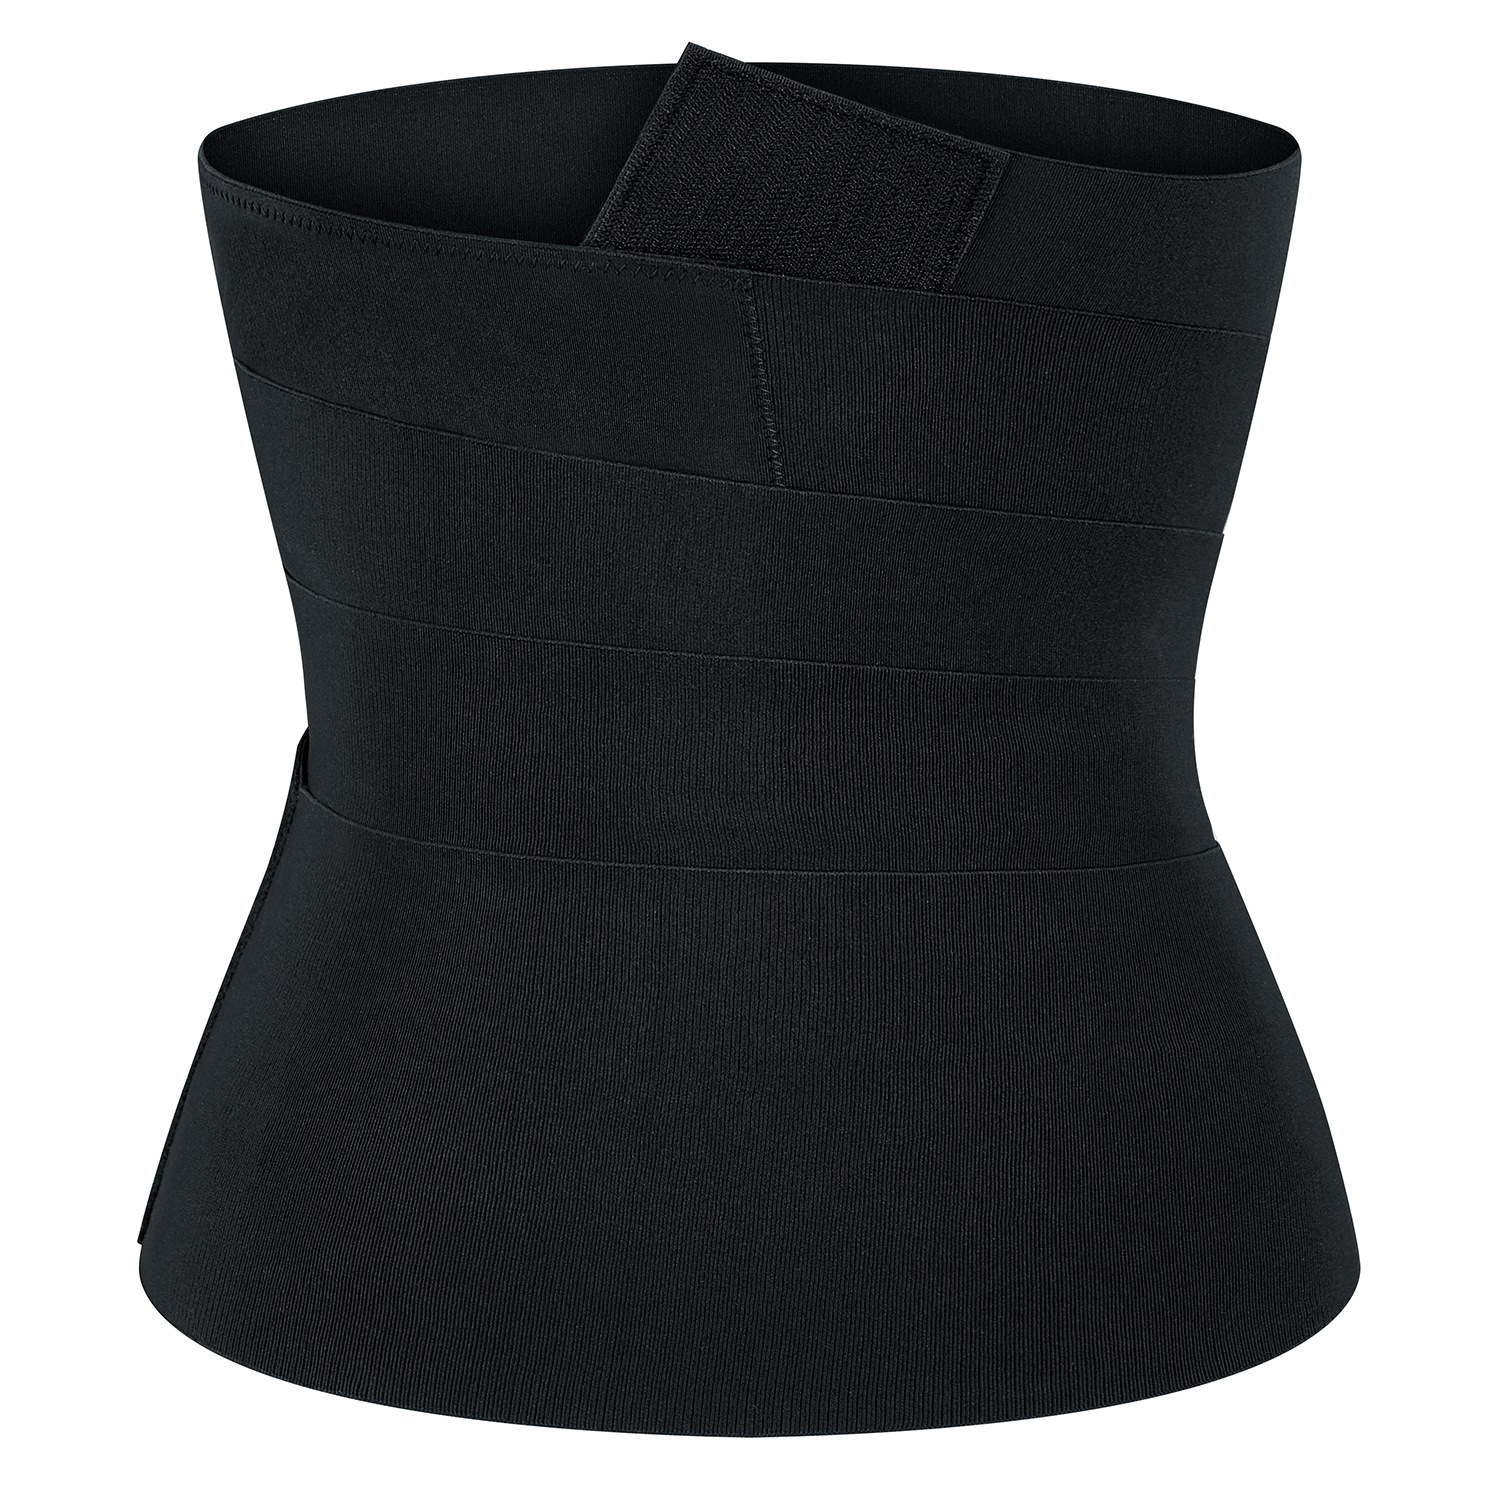 13 Ft. Long Waist Trainer for Women Under Clothes, Tummy Control